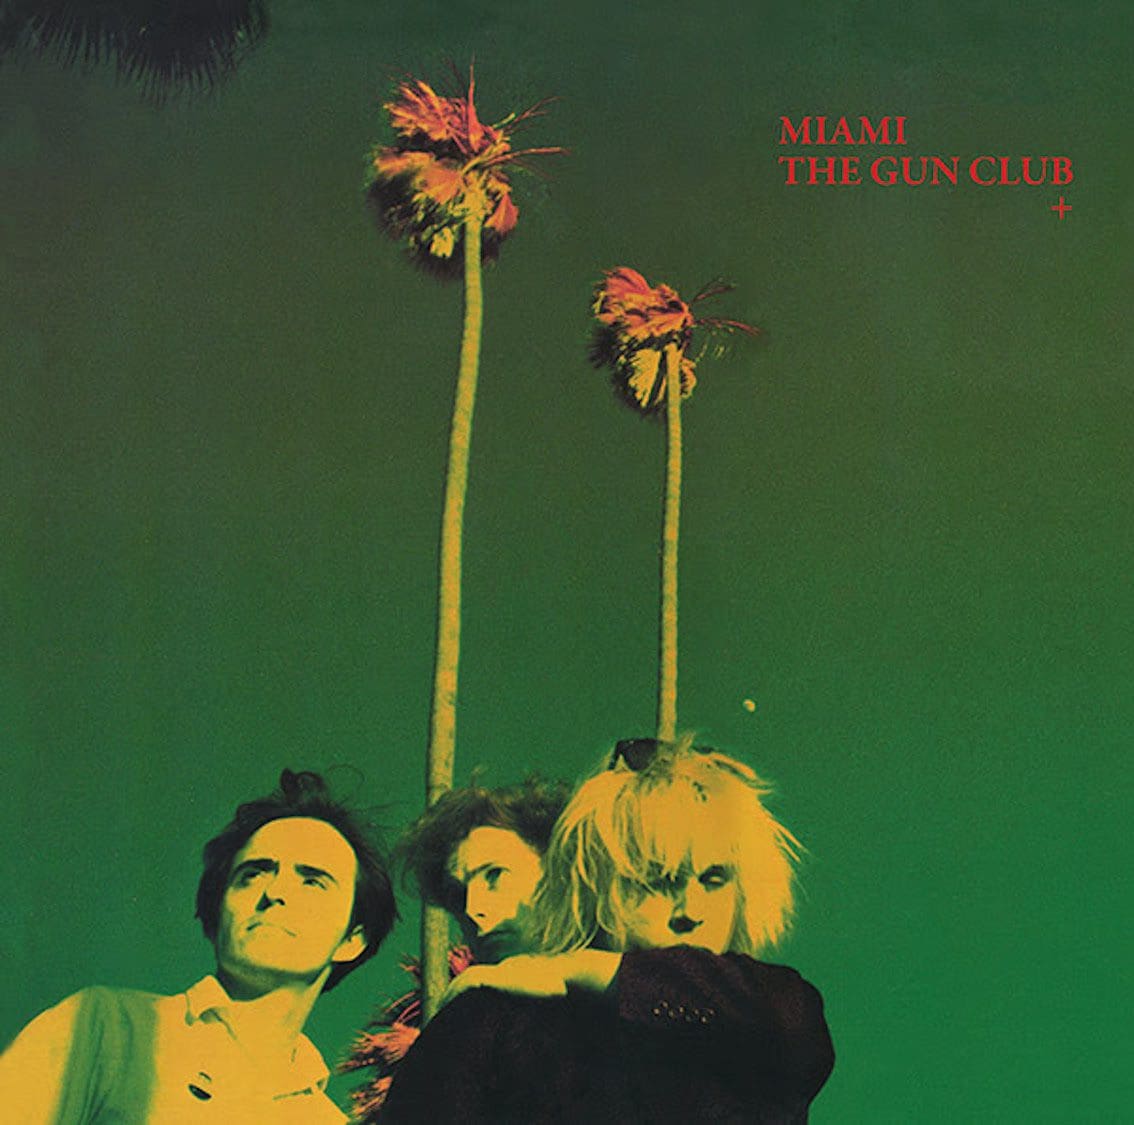 Post-punk cult act The Gun Club sees 1982 album 'Miami' re-released with previously unreleased bonus material